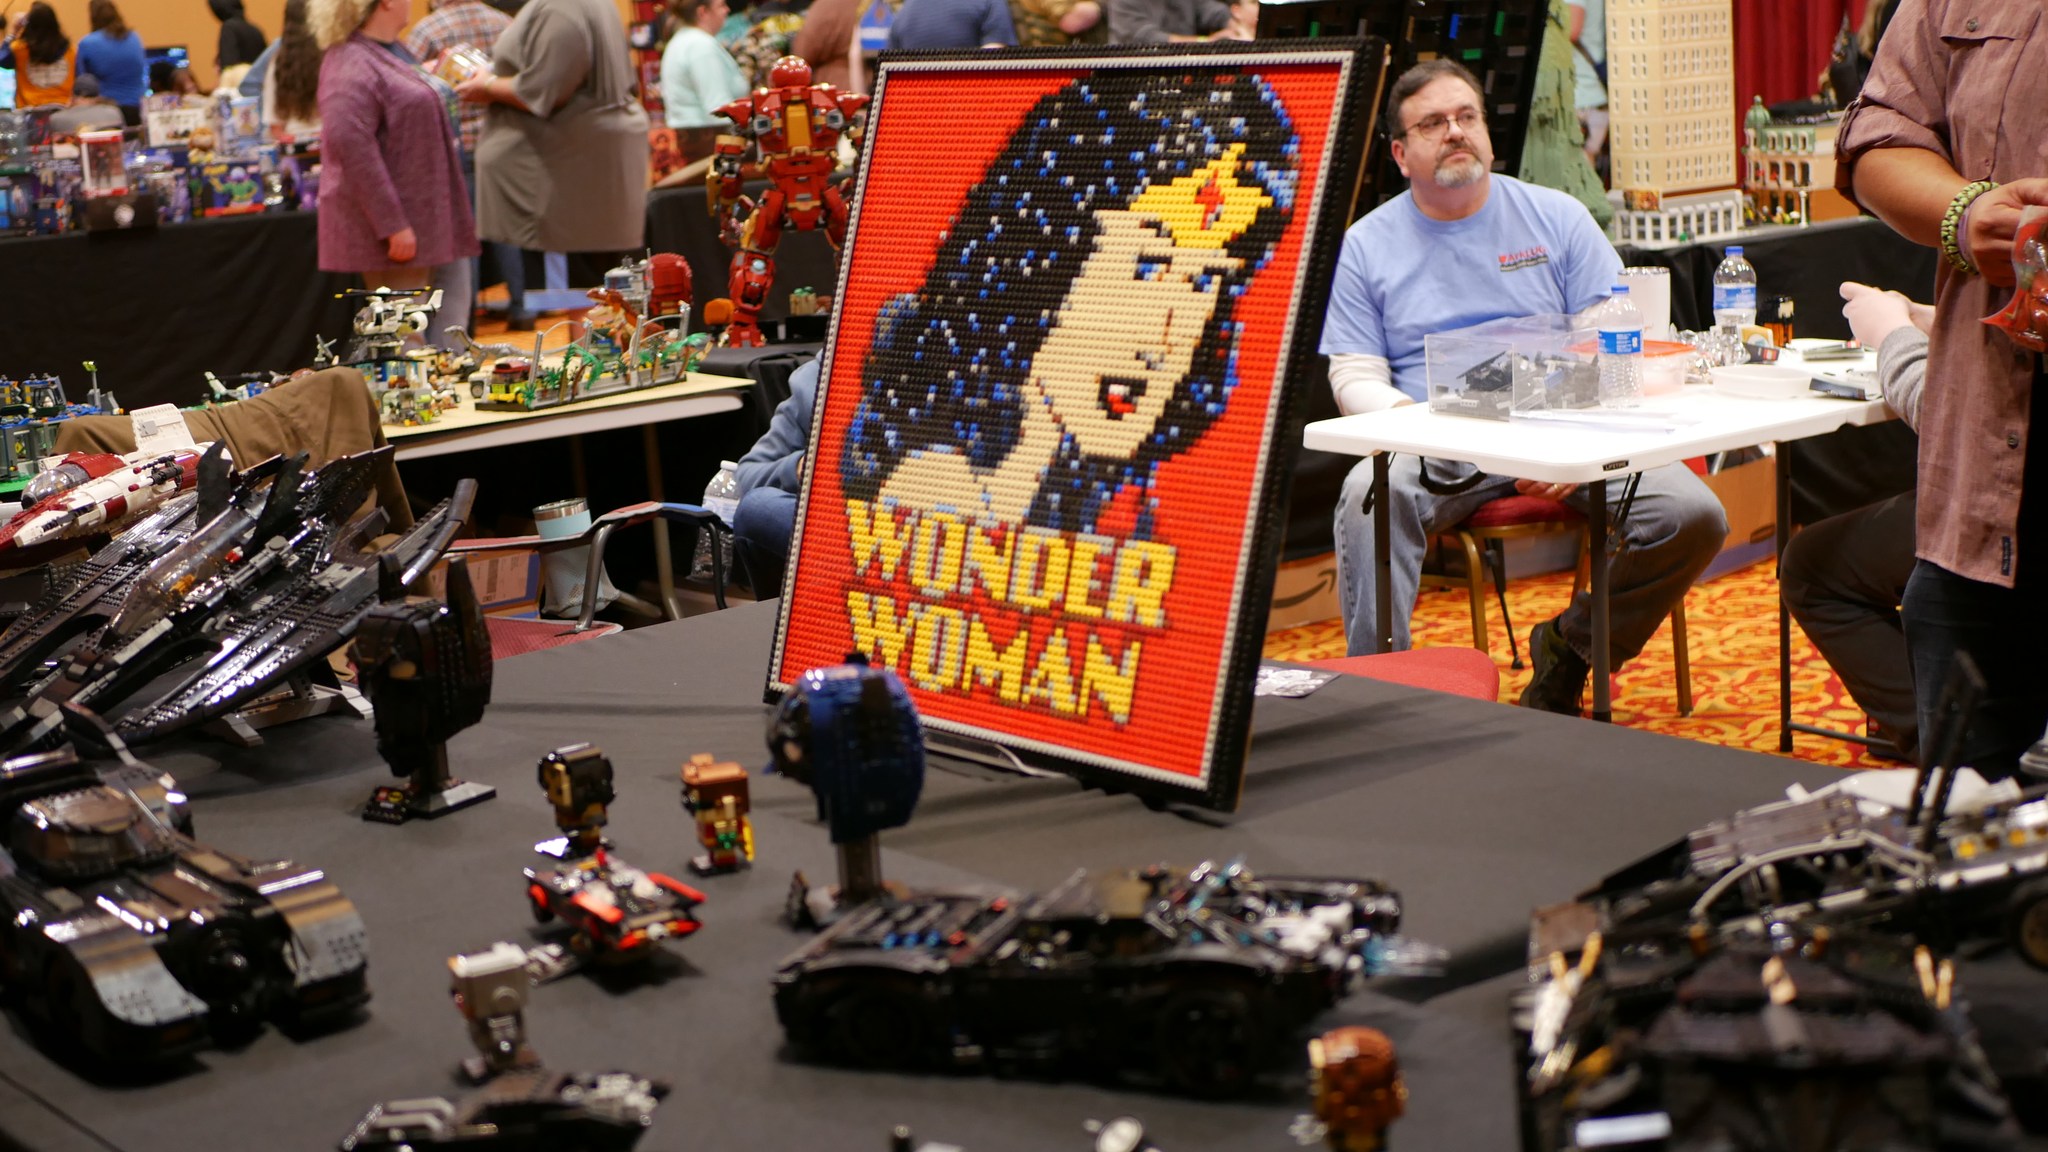 A table of Lego displays at a comic con